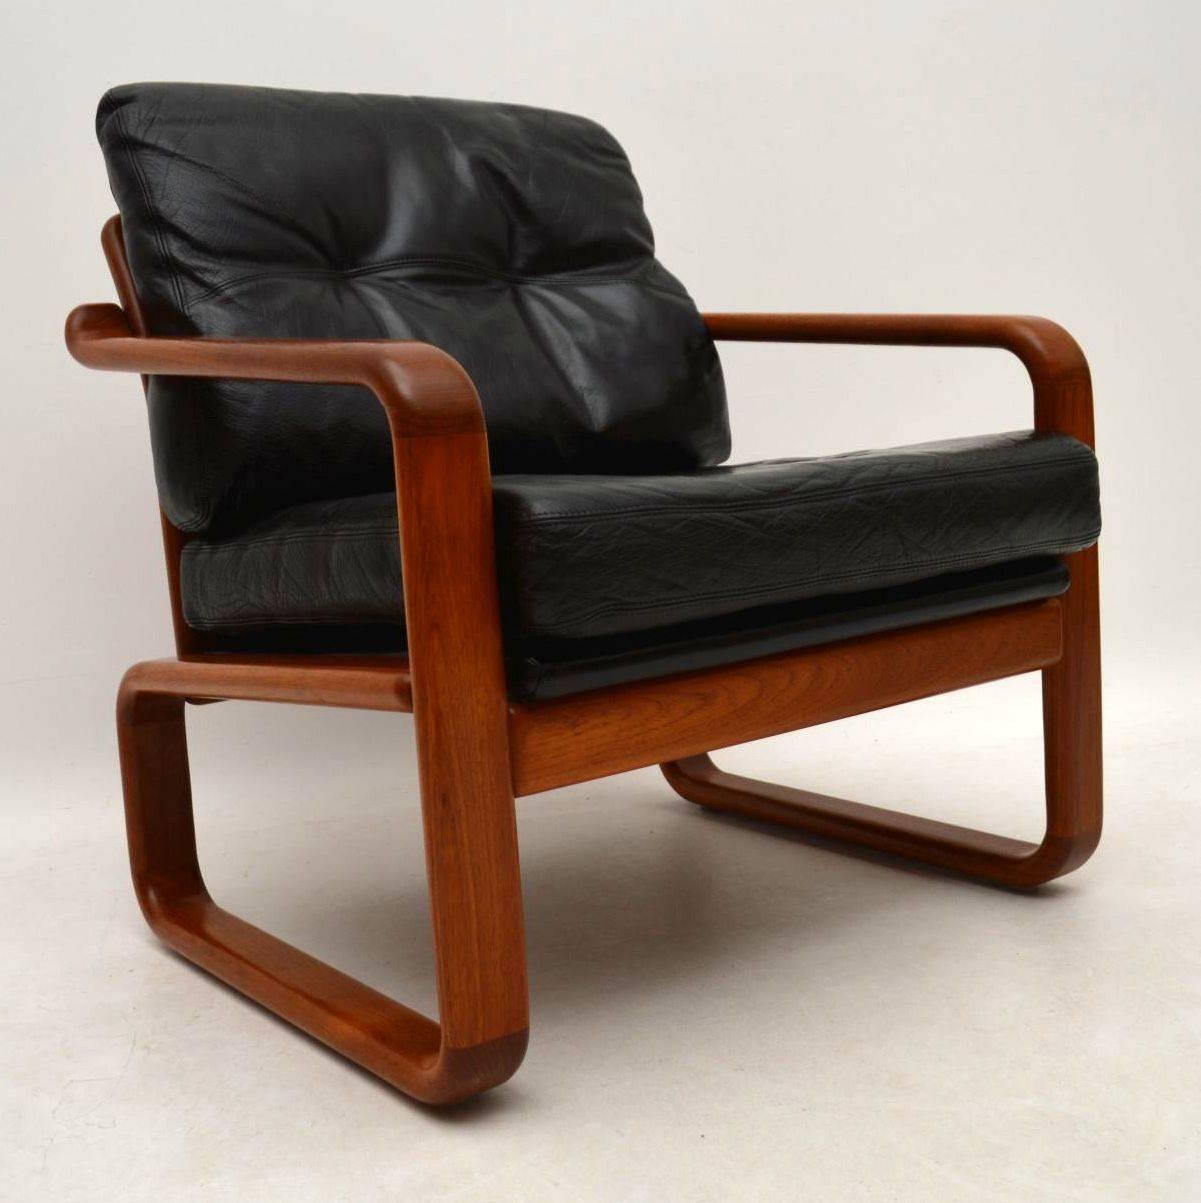 A very stylish and extremely comfortable pair of vintage armchairs, these were made in Denmark and date from around the 1960s-1970s. The quality is amazing, they have a solid teak frames and black leather cushions. The condition is superb for its